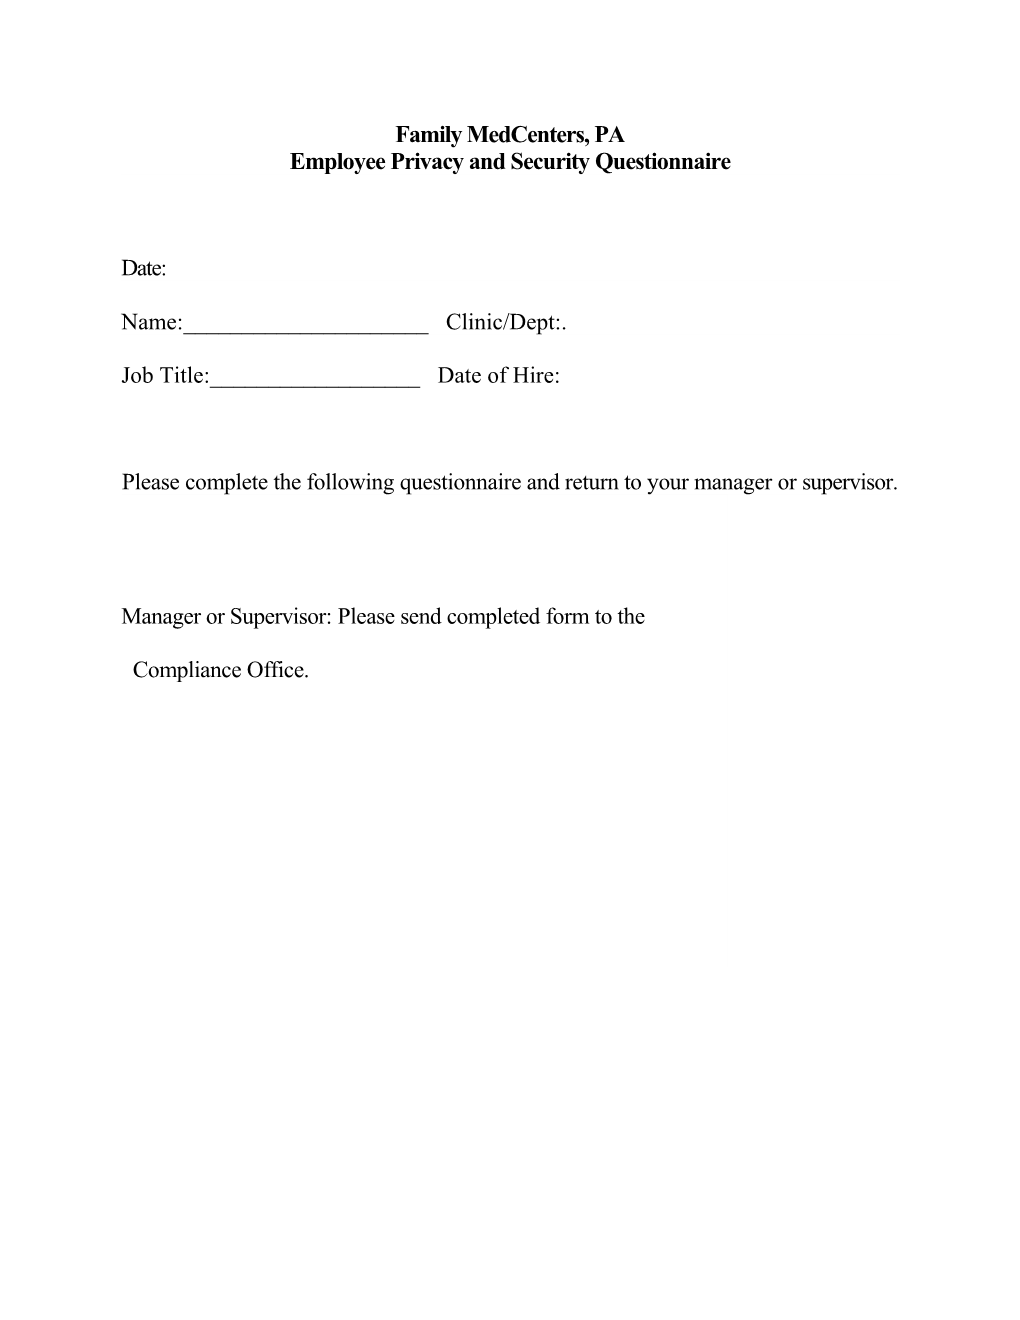 Family Medcenters, PA Employee Privacy and Security Questionnaire